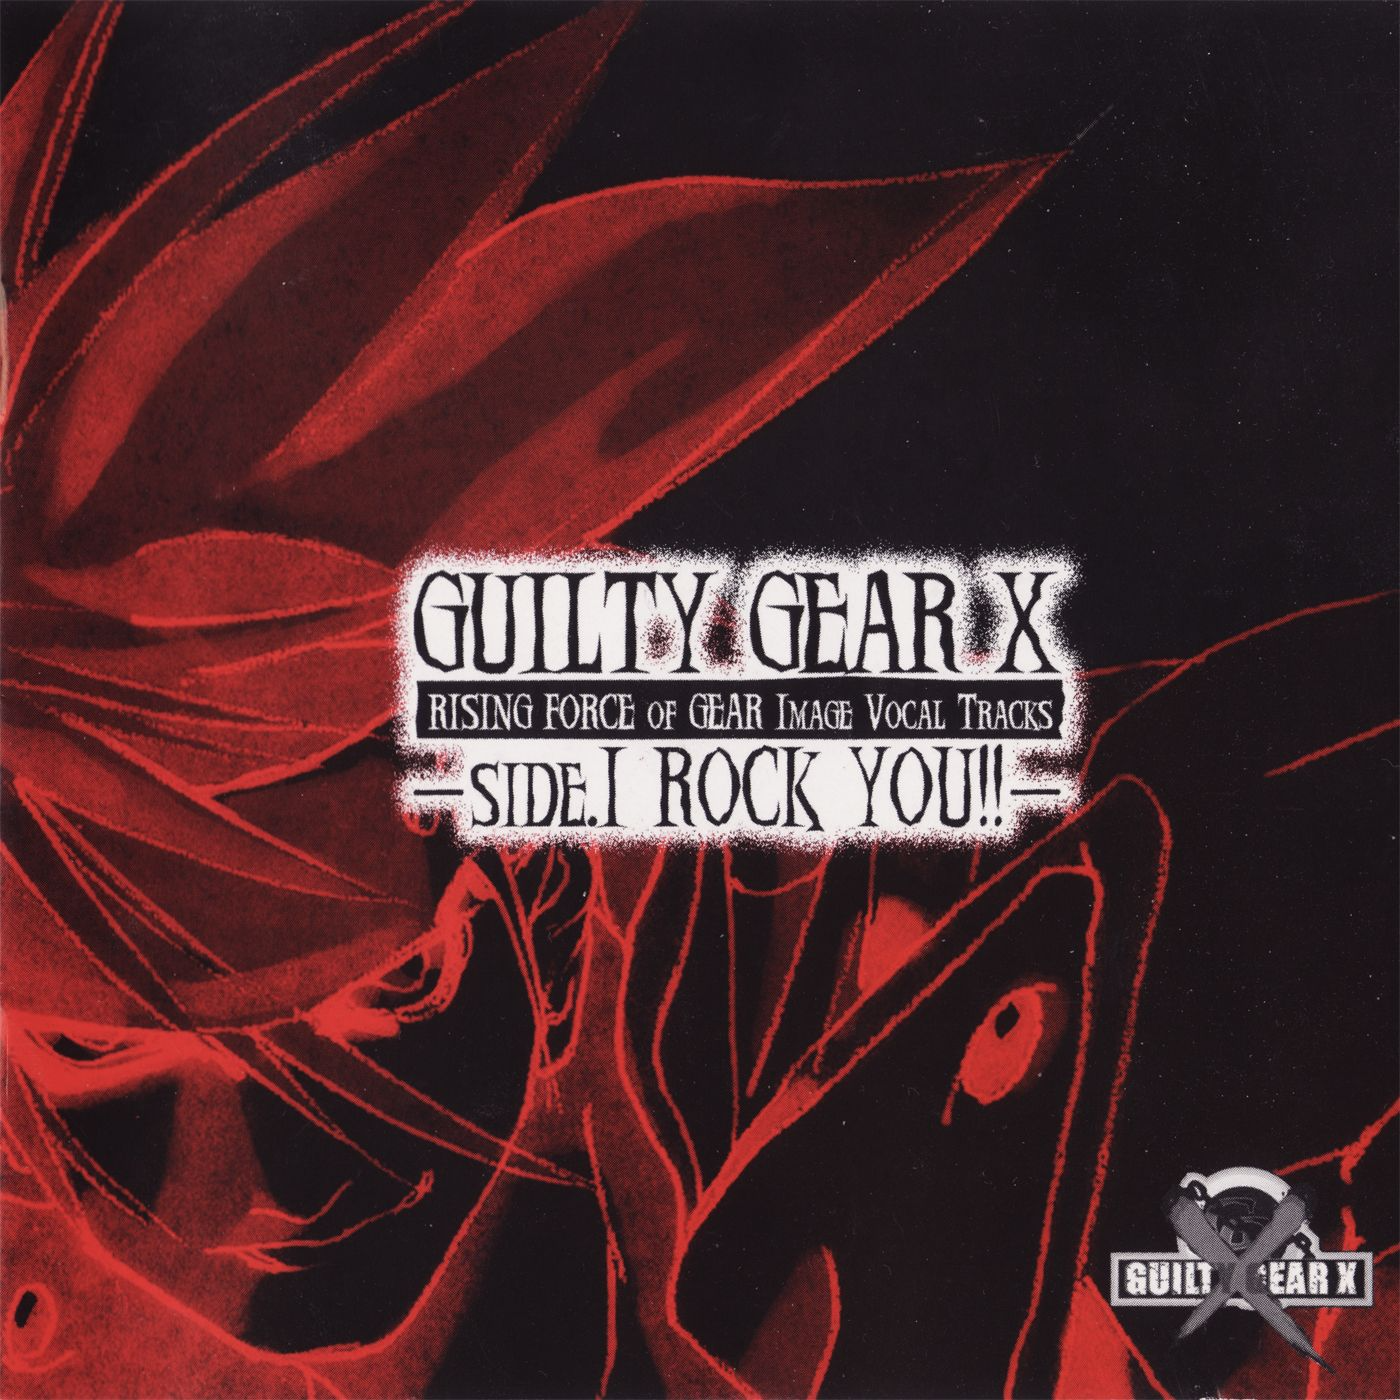 GUILTY GEAR X RISING FORCE OF GEAR IMAGE VOCAL TRACKS -SIDE.1 ROCK YOU!!-